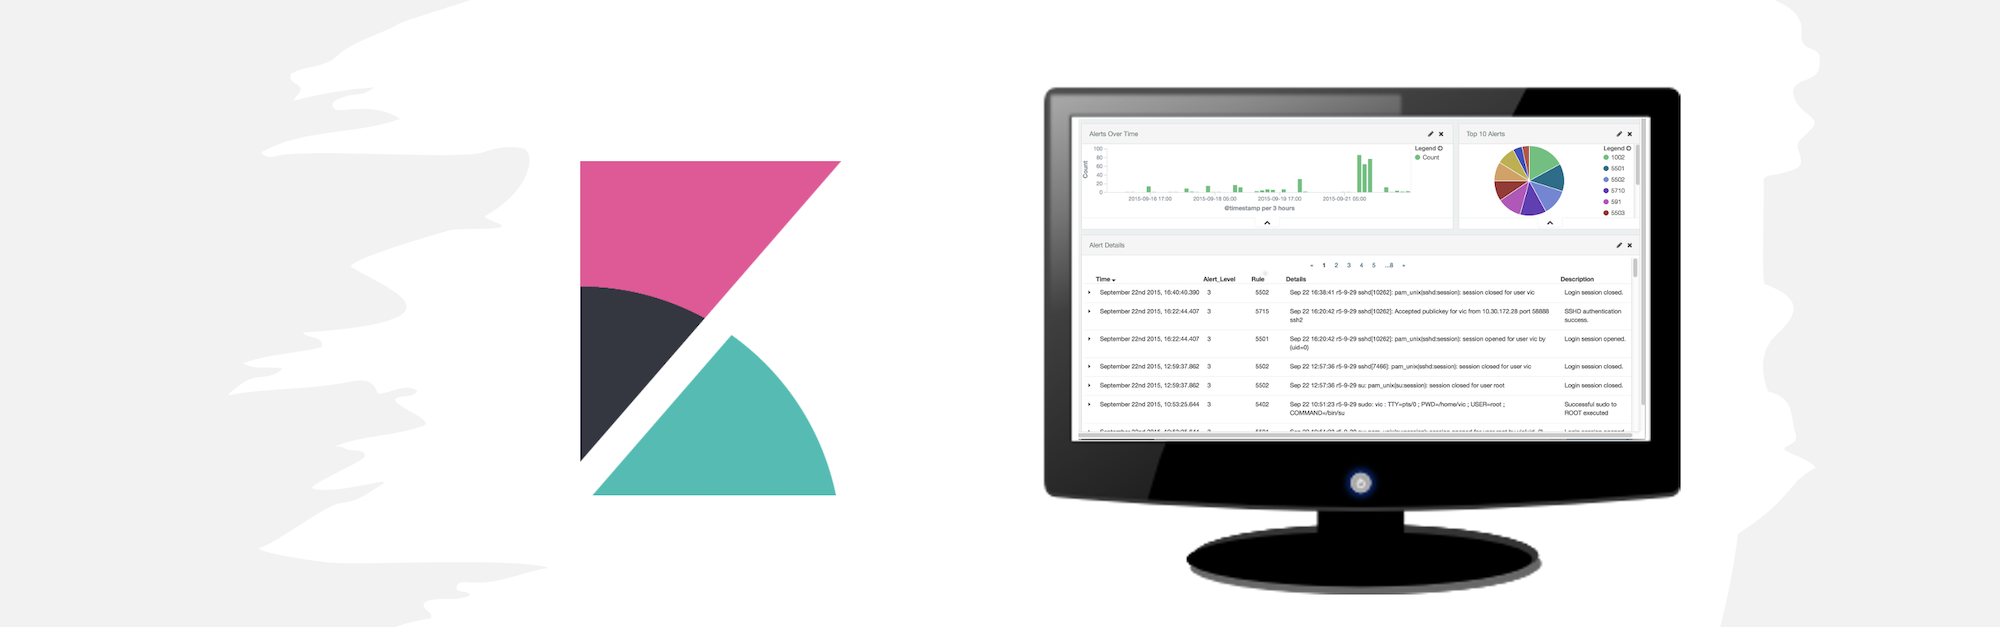 Create an OSSEC Log Management Console with Kibana